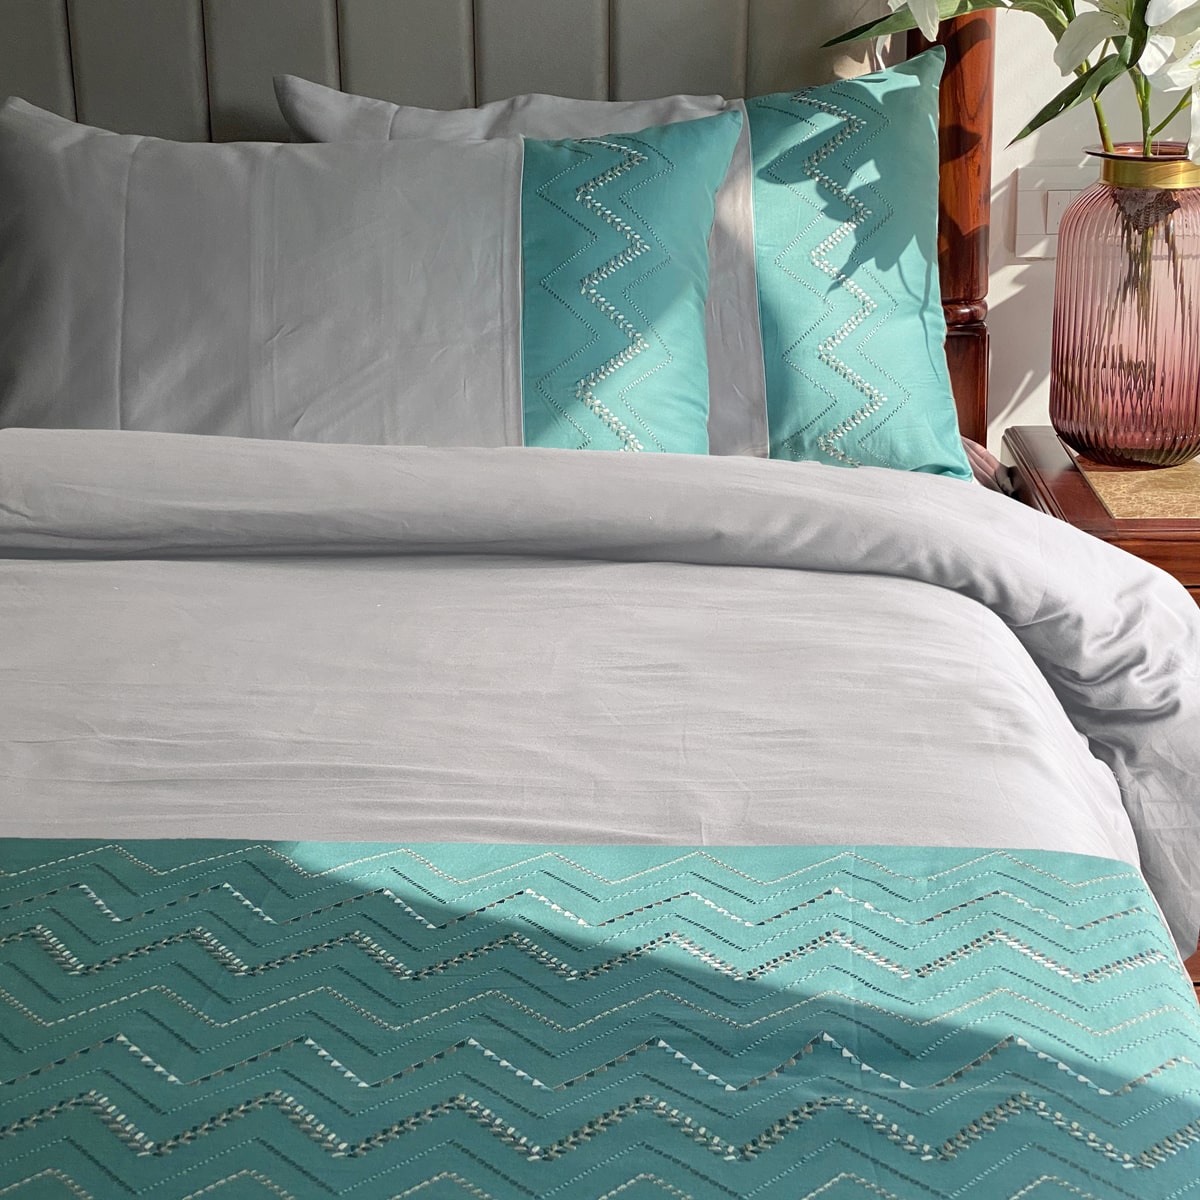 Chevron Turquoise and Grey Duvet Cover Set